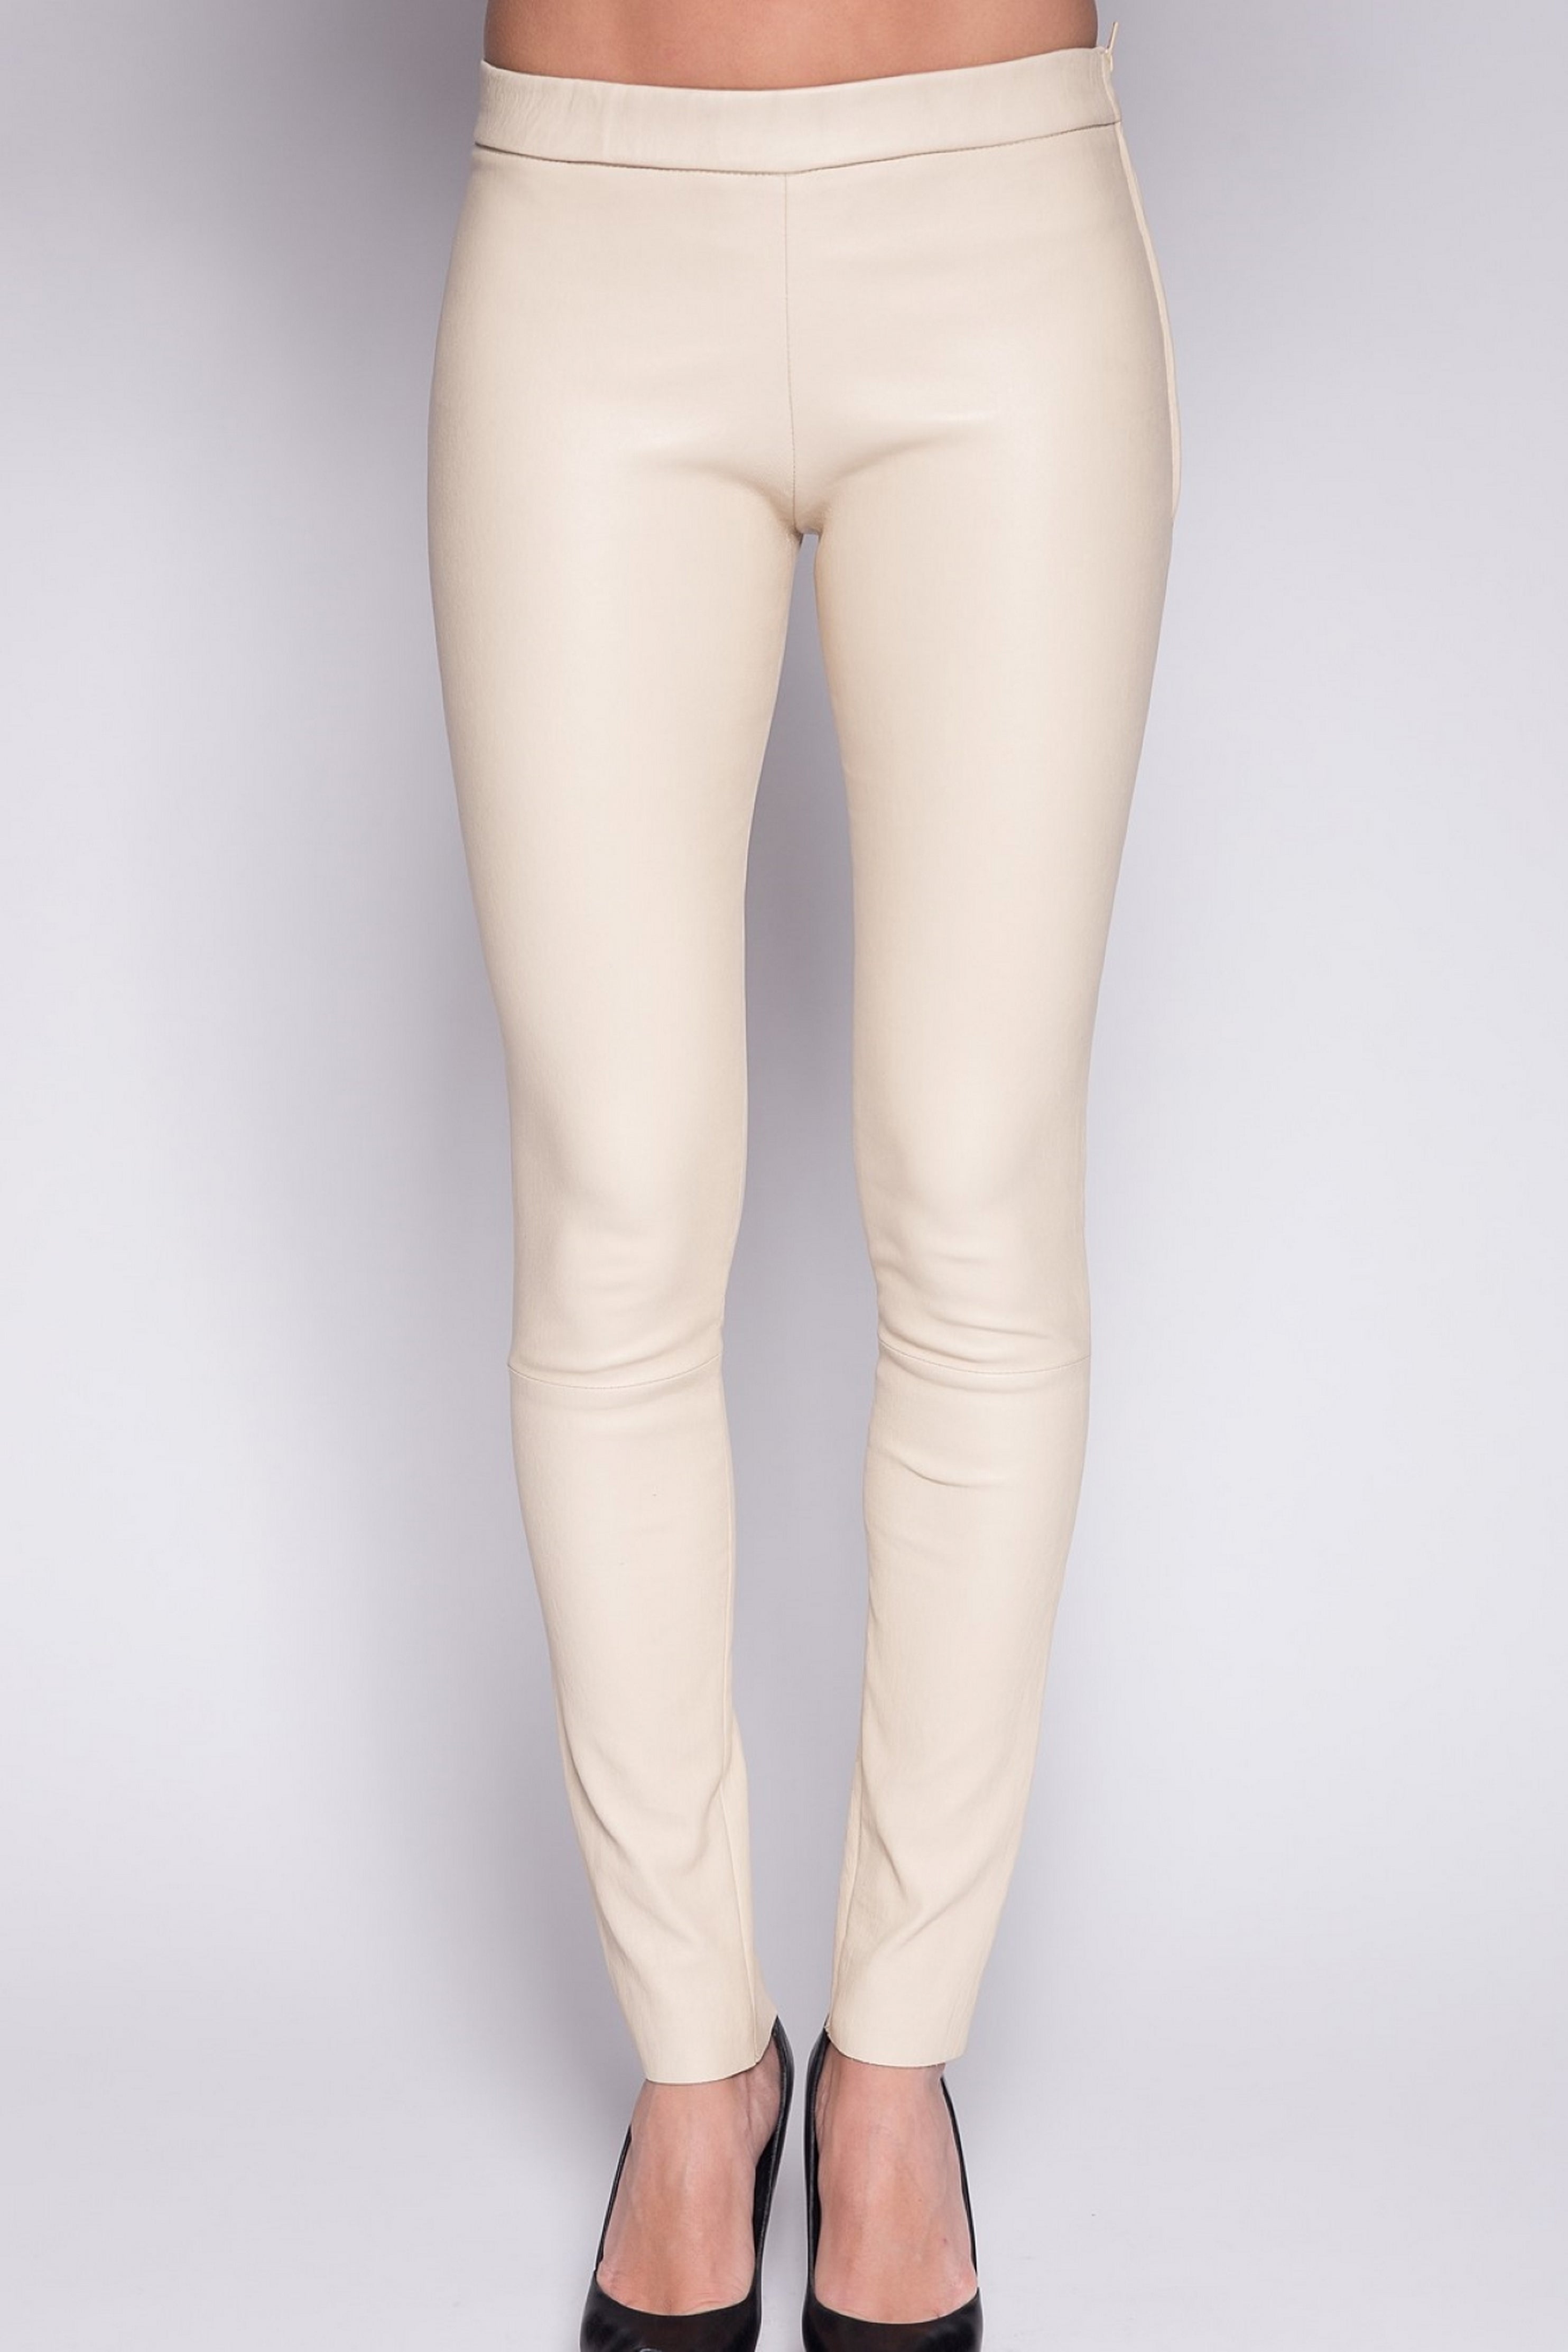 Leggings : S,M,L,XL,XXL Suppliers 15102779 - Wholesale Manufacturers and  Exporters